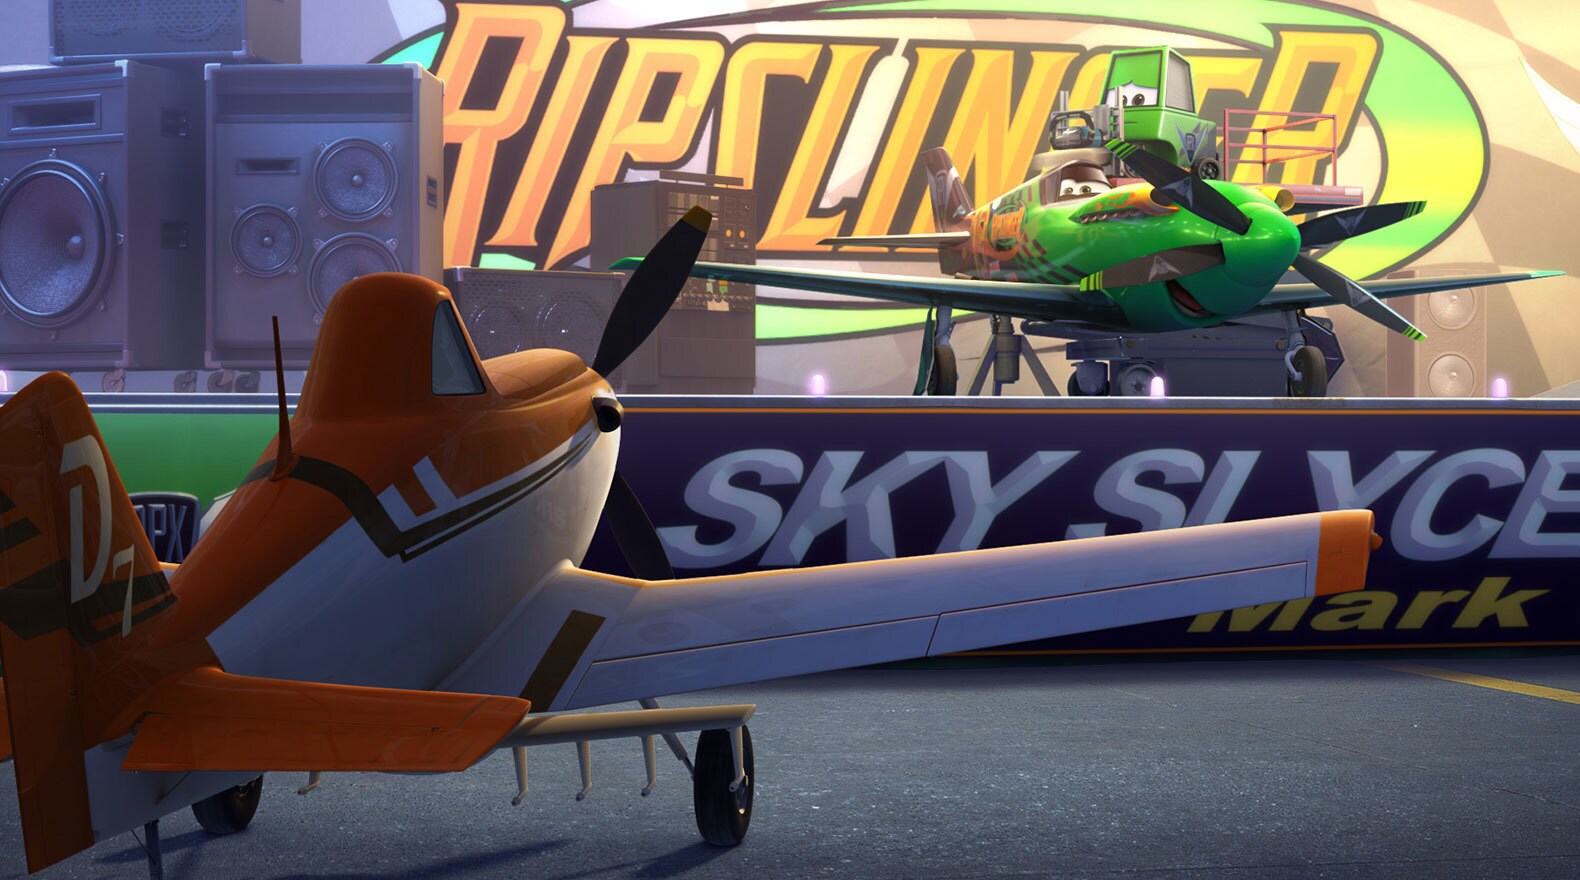 Dusty meets world champion Ripslinger from the movie "Planes"